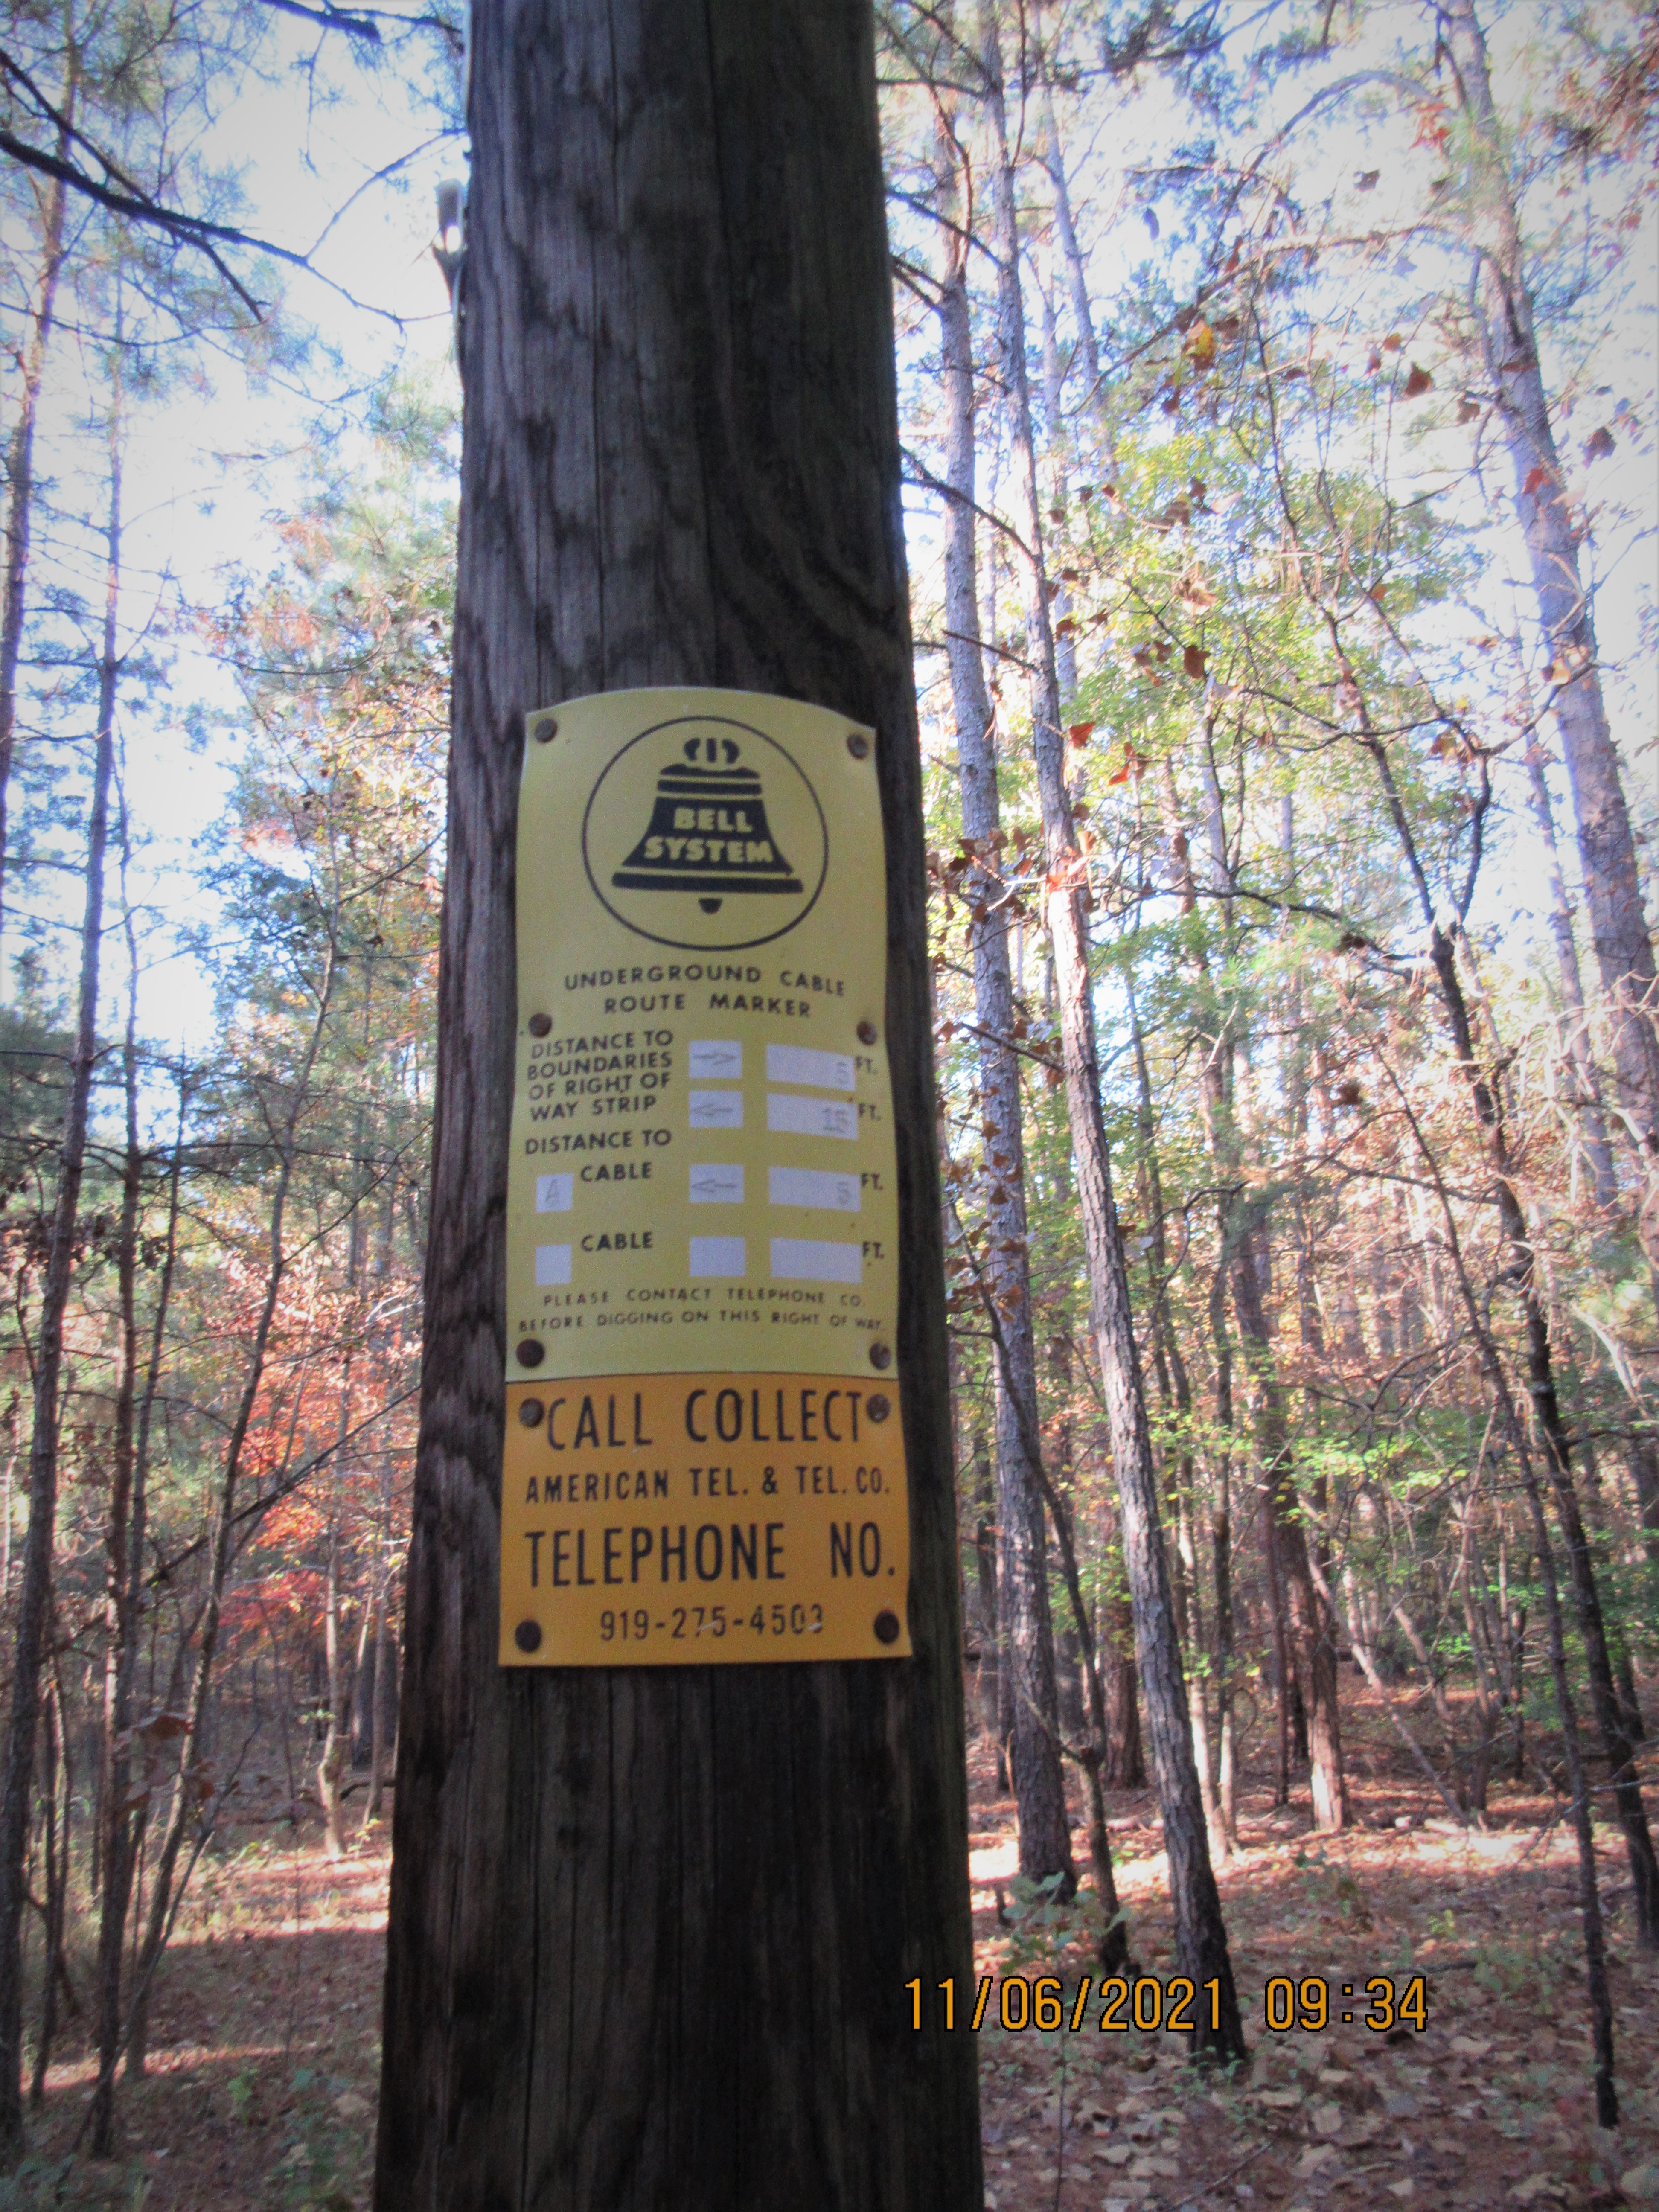 Nichols Longleaf Pine Preserve: Protecting the Giants of the Piedmont